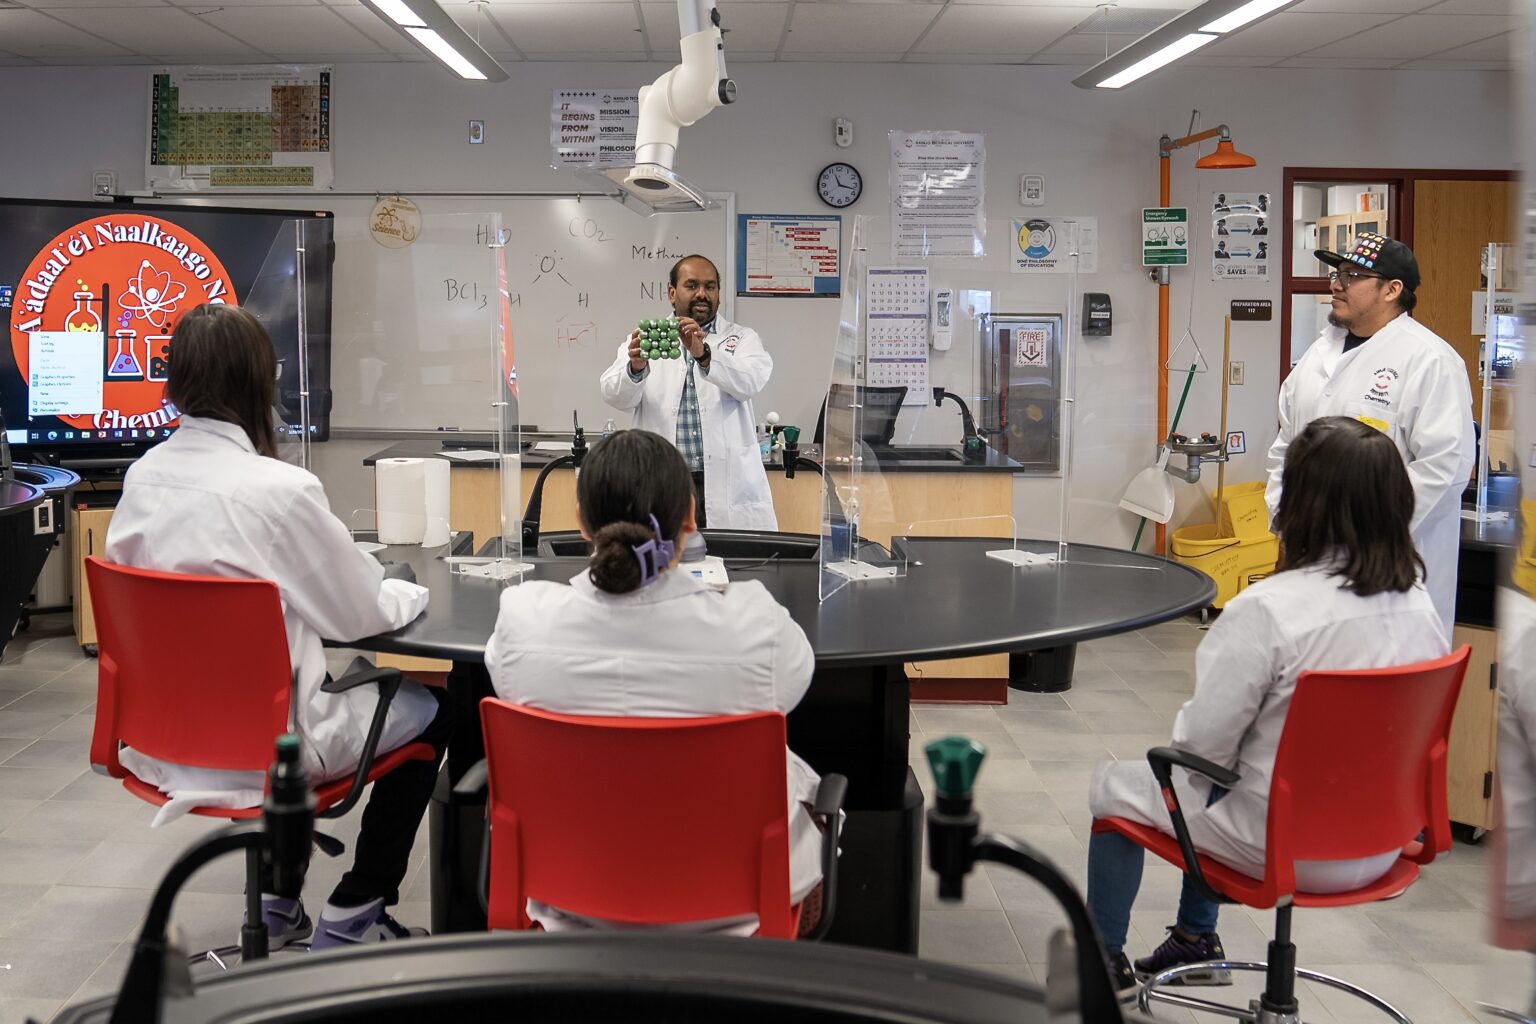 Dr. Thiagarajan Soundappan leads a class at Navajo Technical University. The university’s collaboration with Harvard is creating new research opportunities for students and offering paths to graduate study. Photo: Wade Shannah, Navajo Technical University